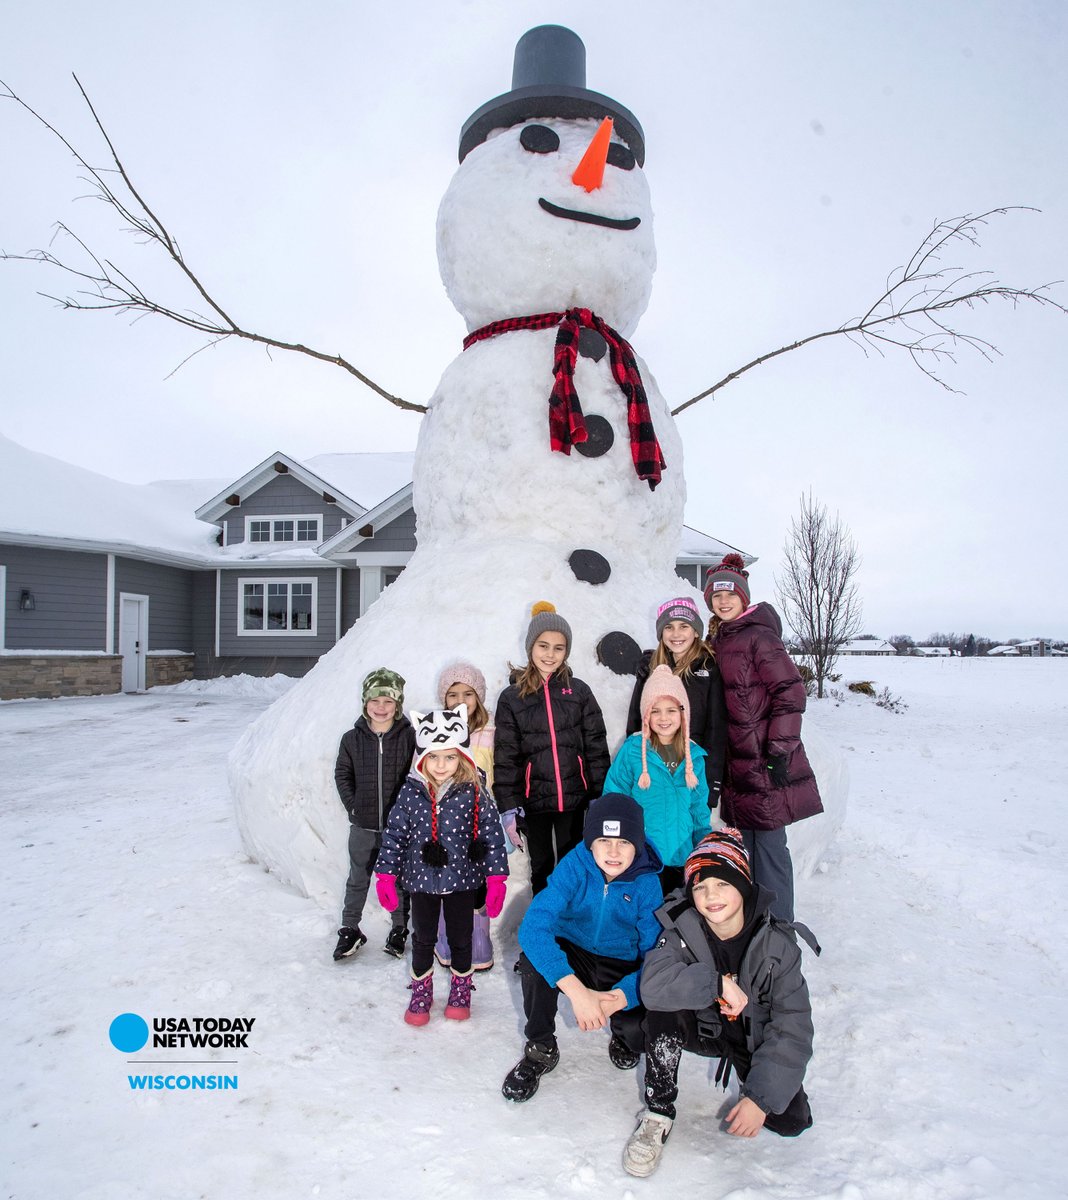 There is a big snowman in Cedar Grove, Wis., whose eventual melting will help benefit Children's Hospital of Wisconsin. sheboyganpress.com/story/news/202…